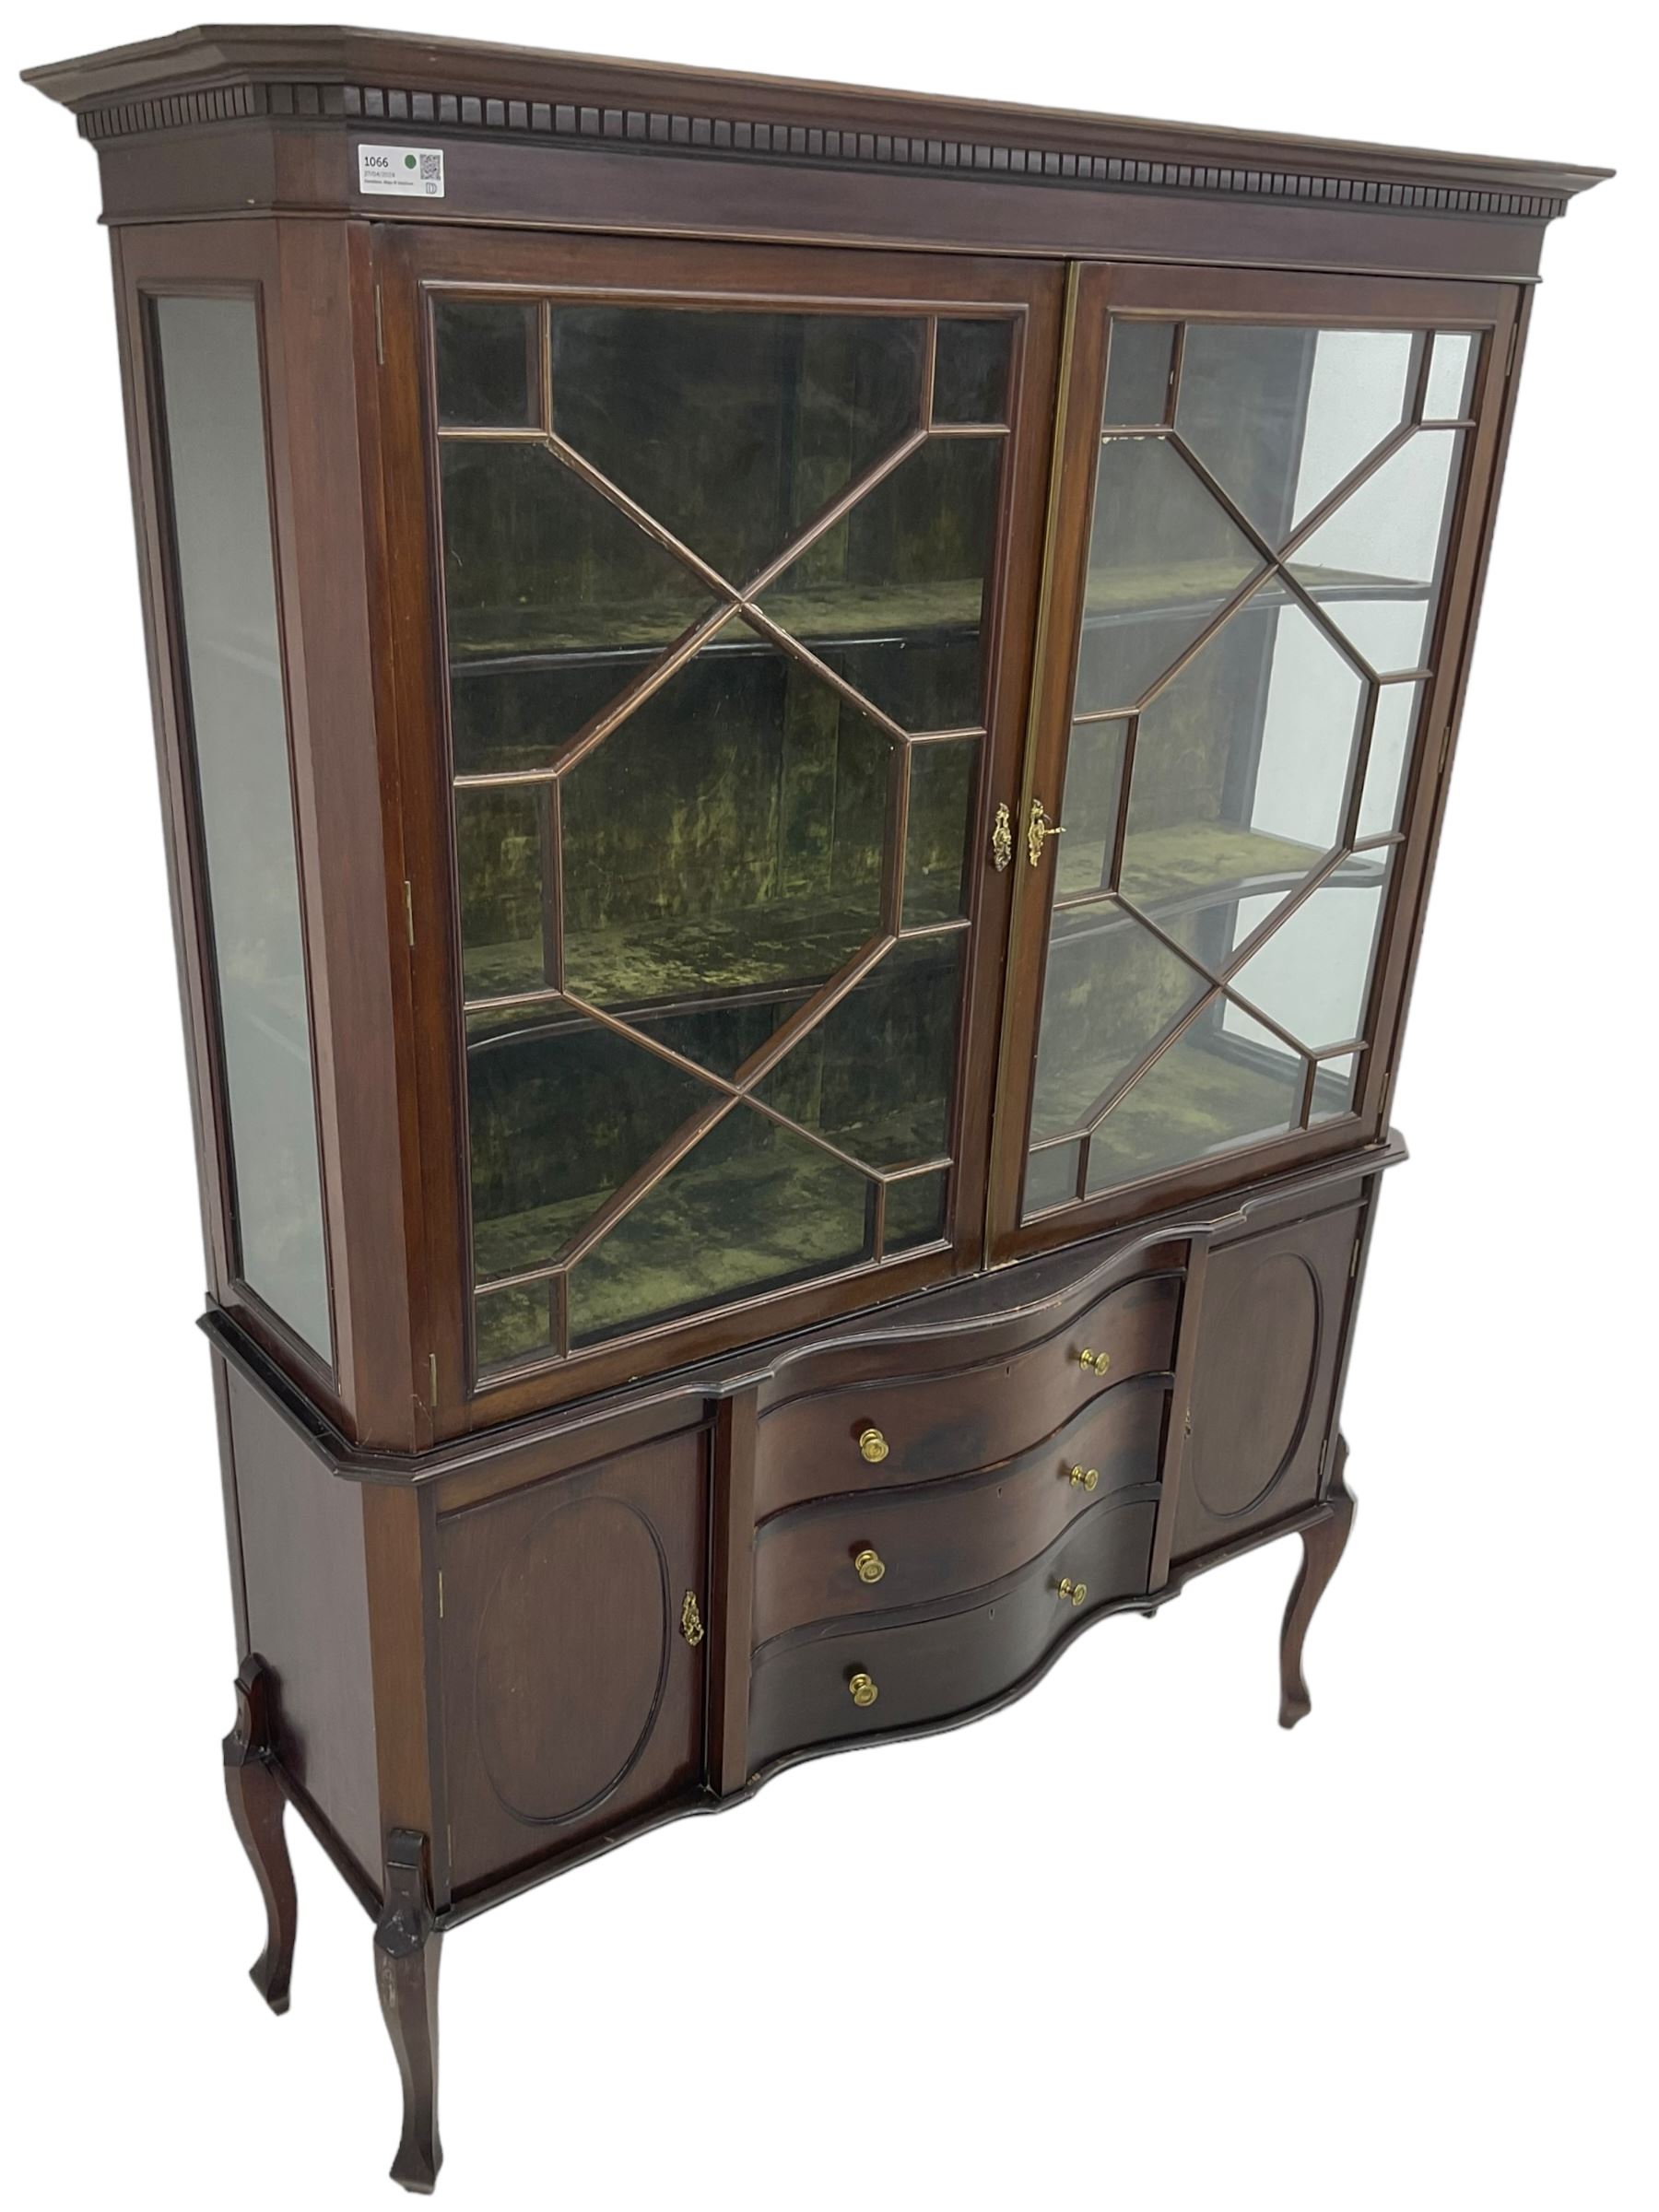 Late 19th century mahogany display cabinet on stand - Image 5 of 7